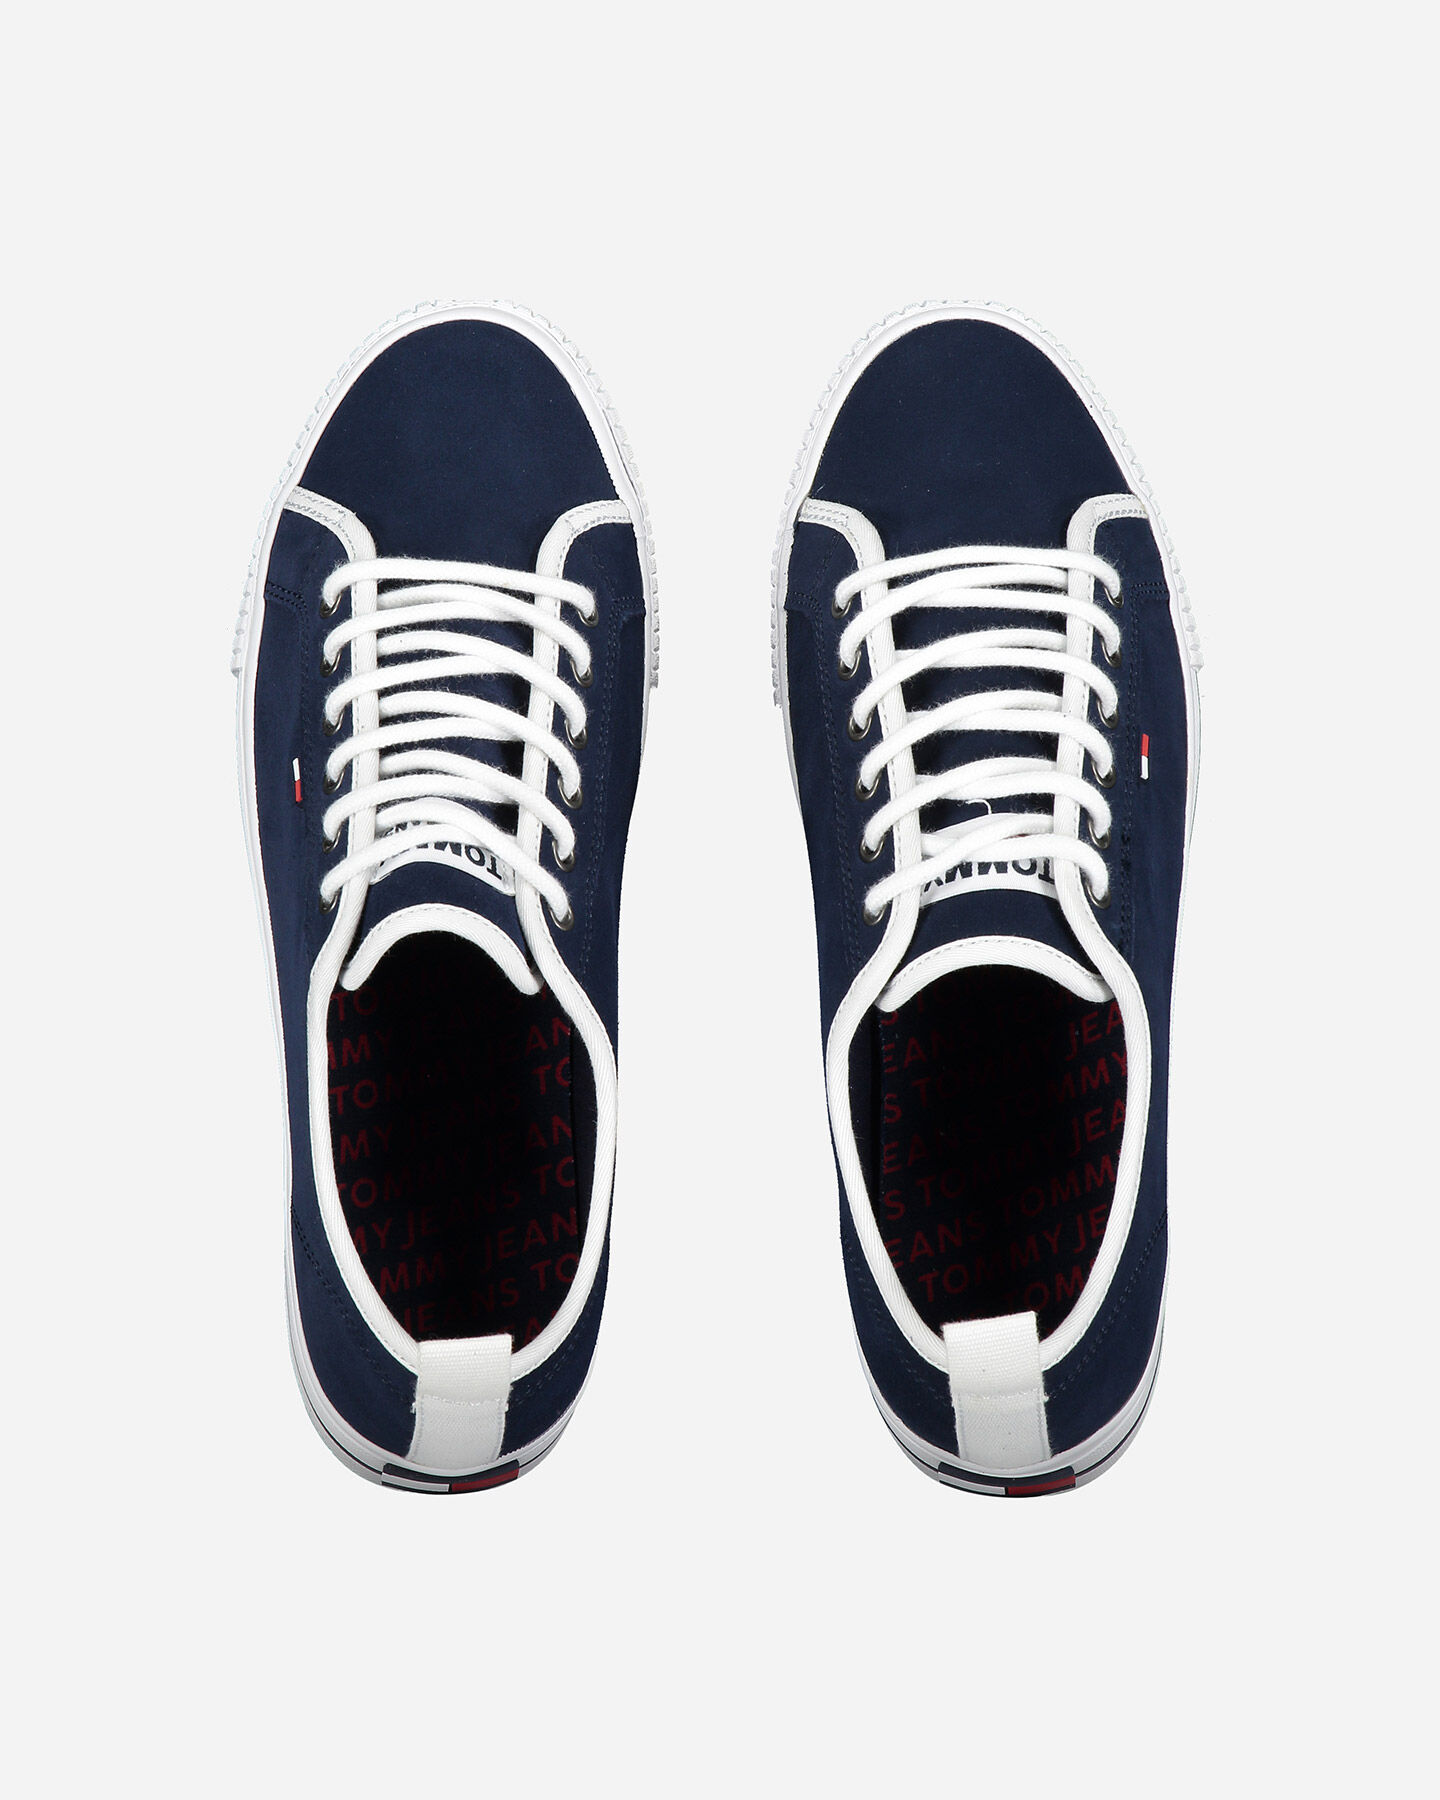  Scarpe sneakers TOMMY HILFIGER CLEATED CITY W S4074058|CBK|36 scatto 3